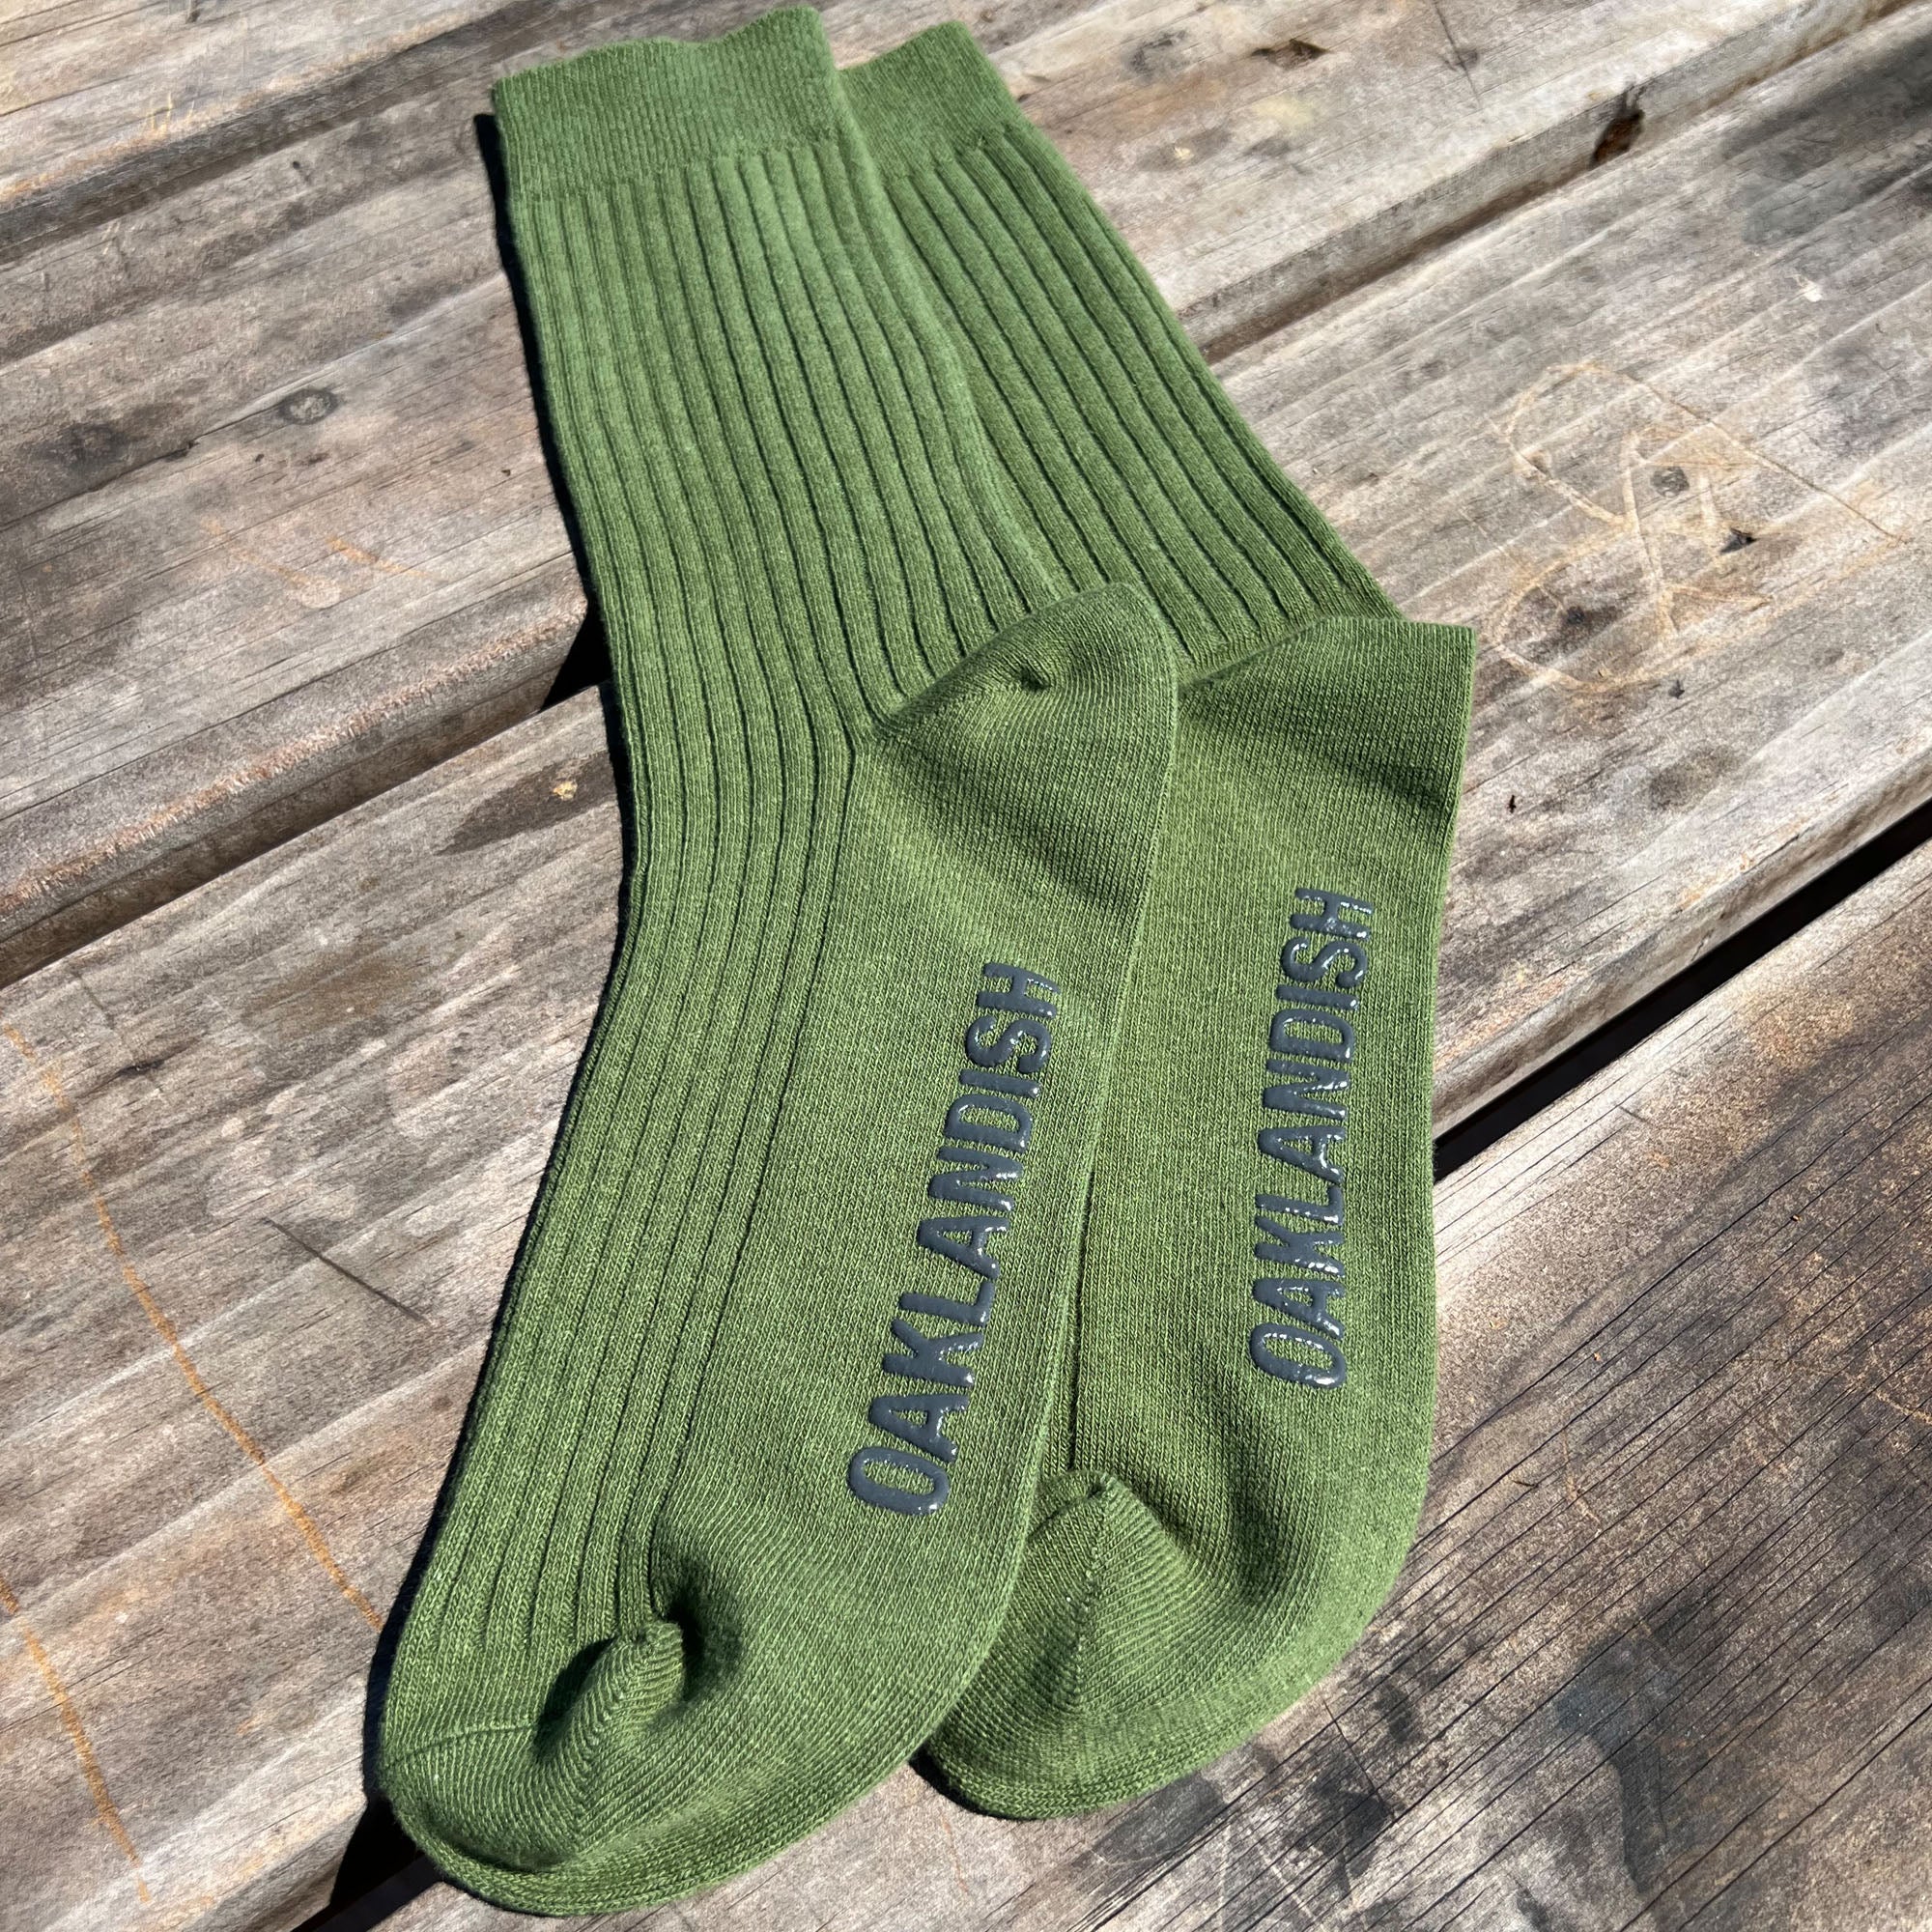 Green high cut men's crew socks on wooden bench with Oaklandish wordmark on the sole.